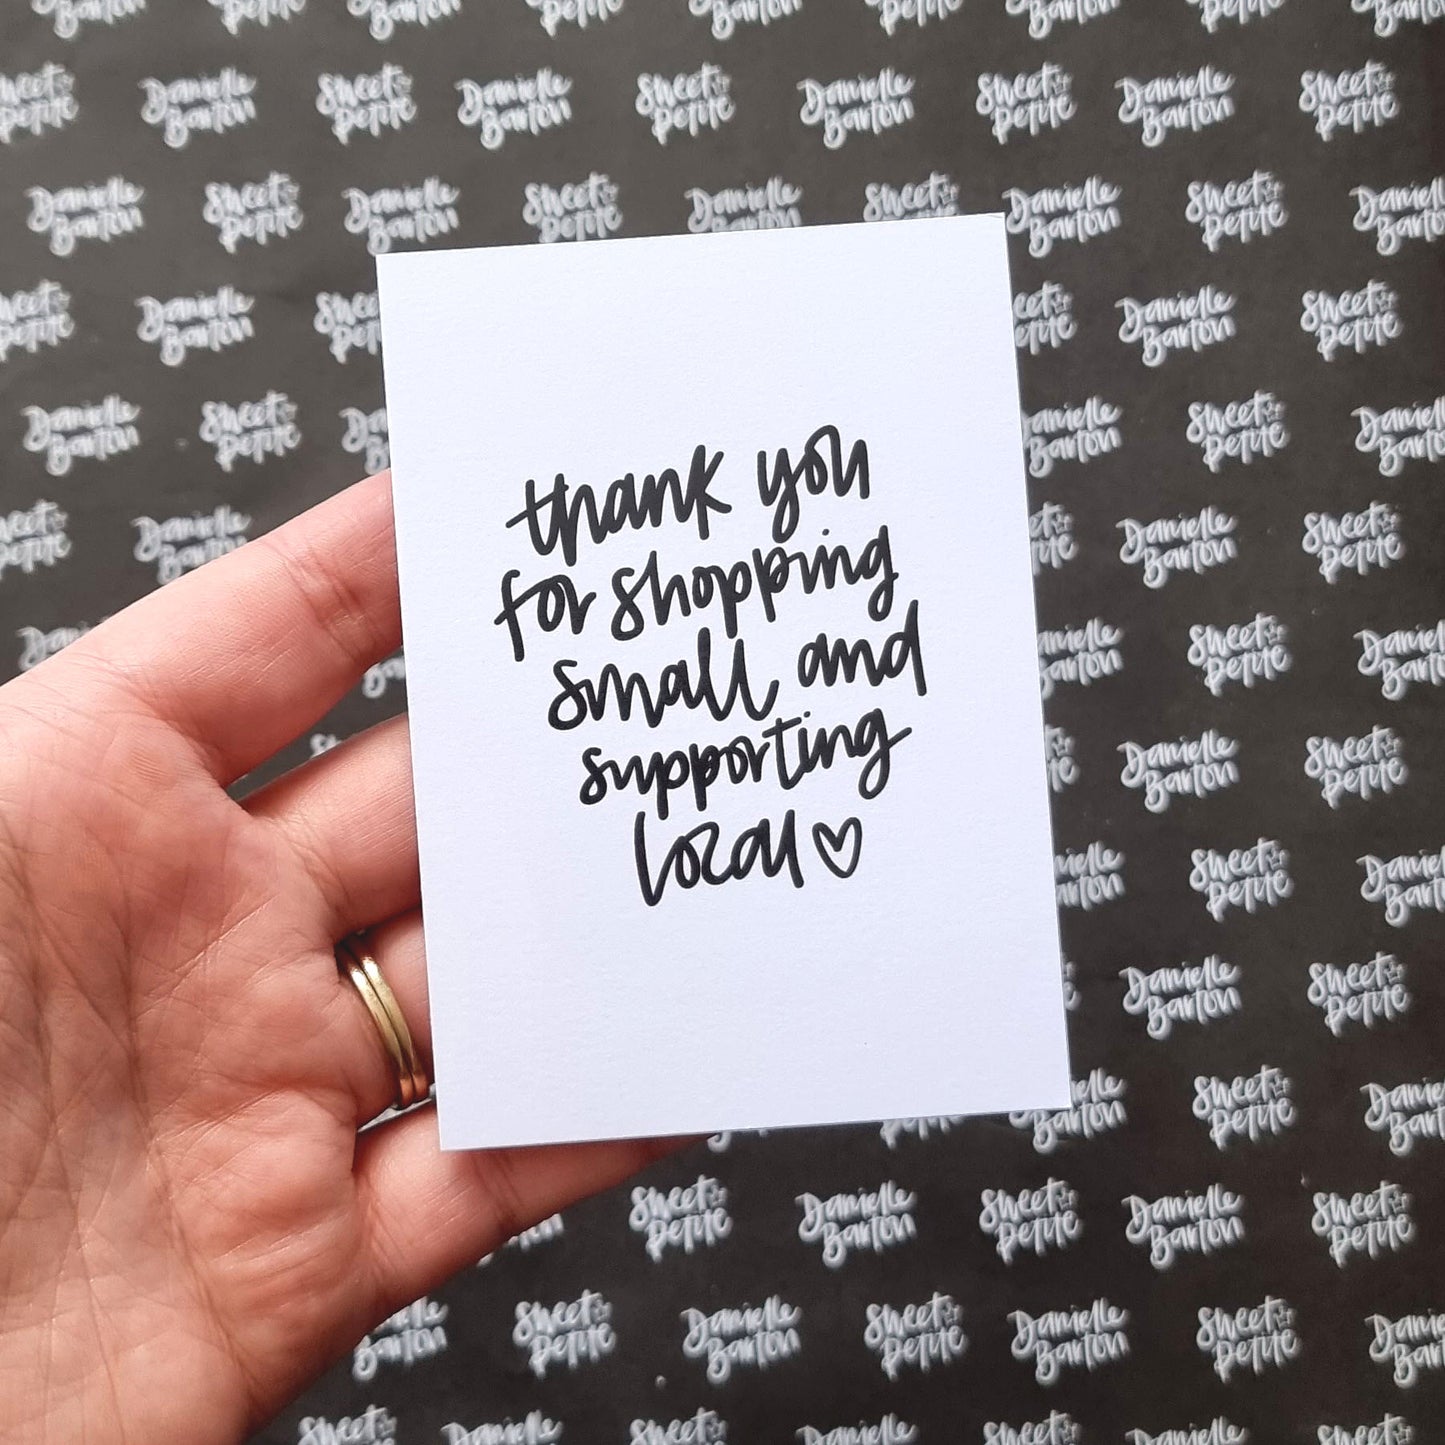 A7 Business Thank You Cards | Thank you for shopping small and supporting local | by Sweet Petite